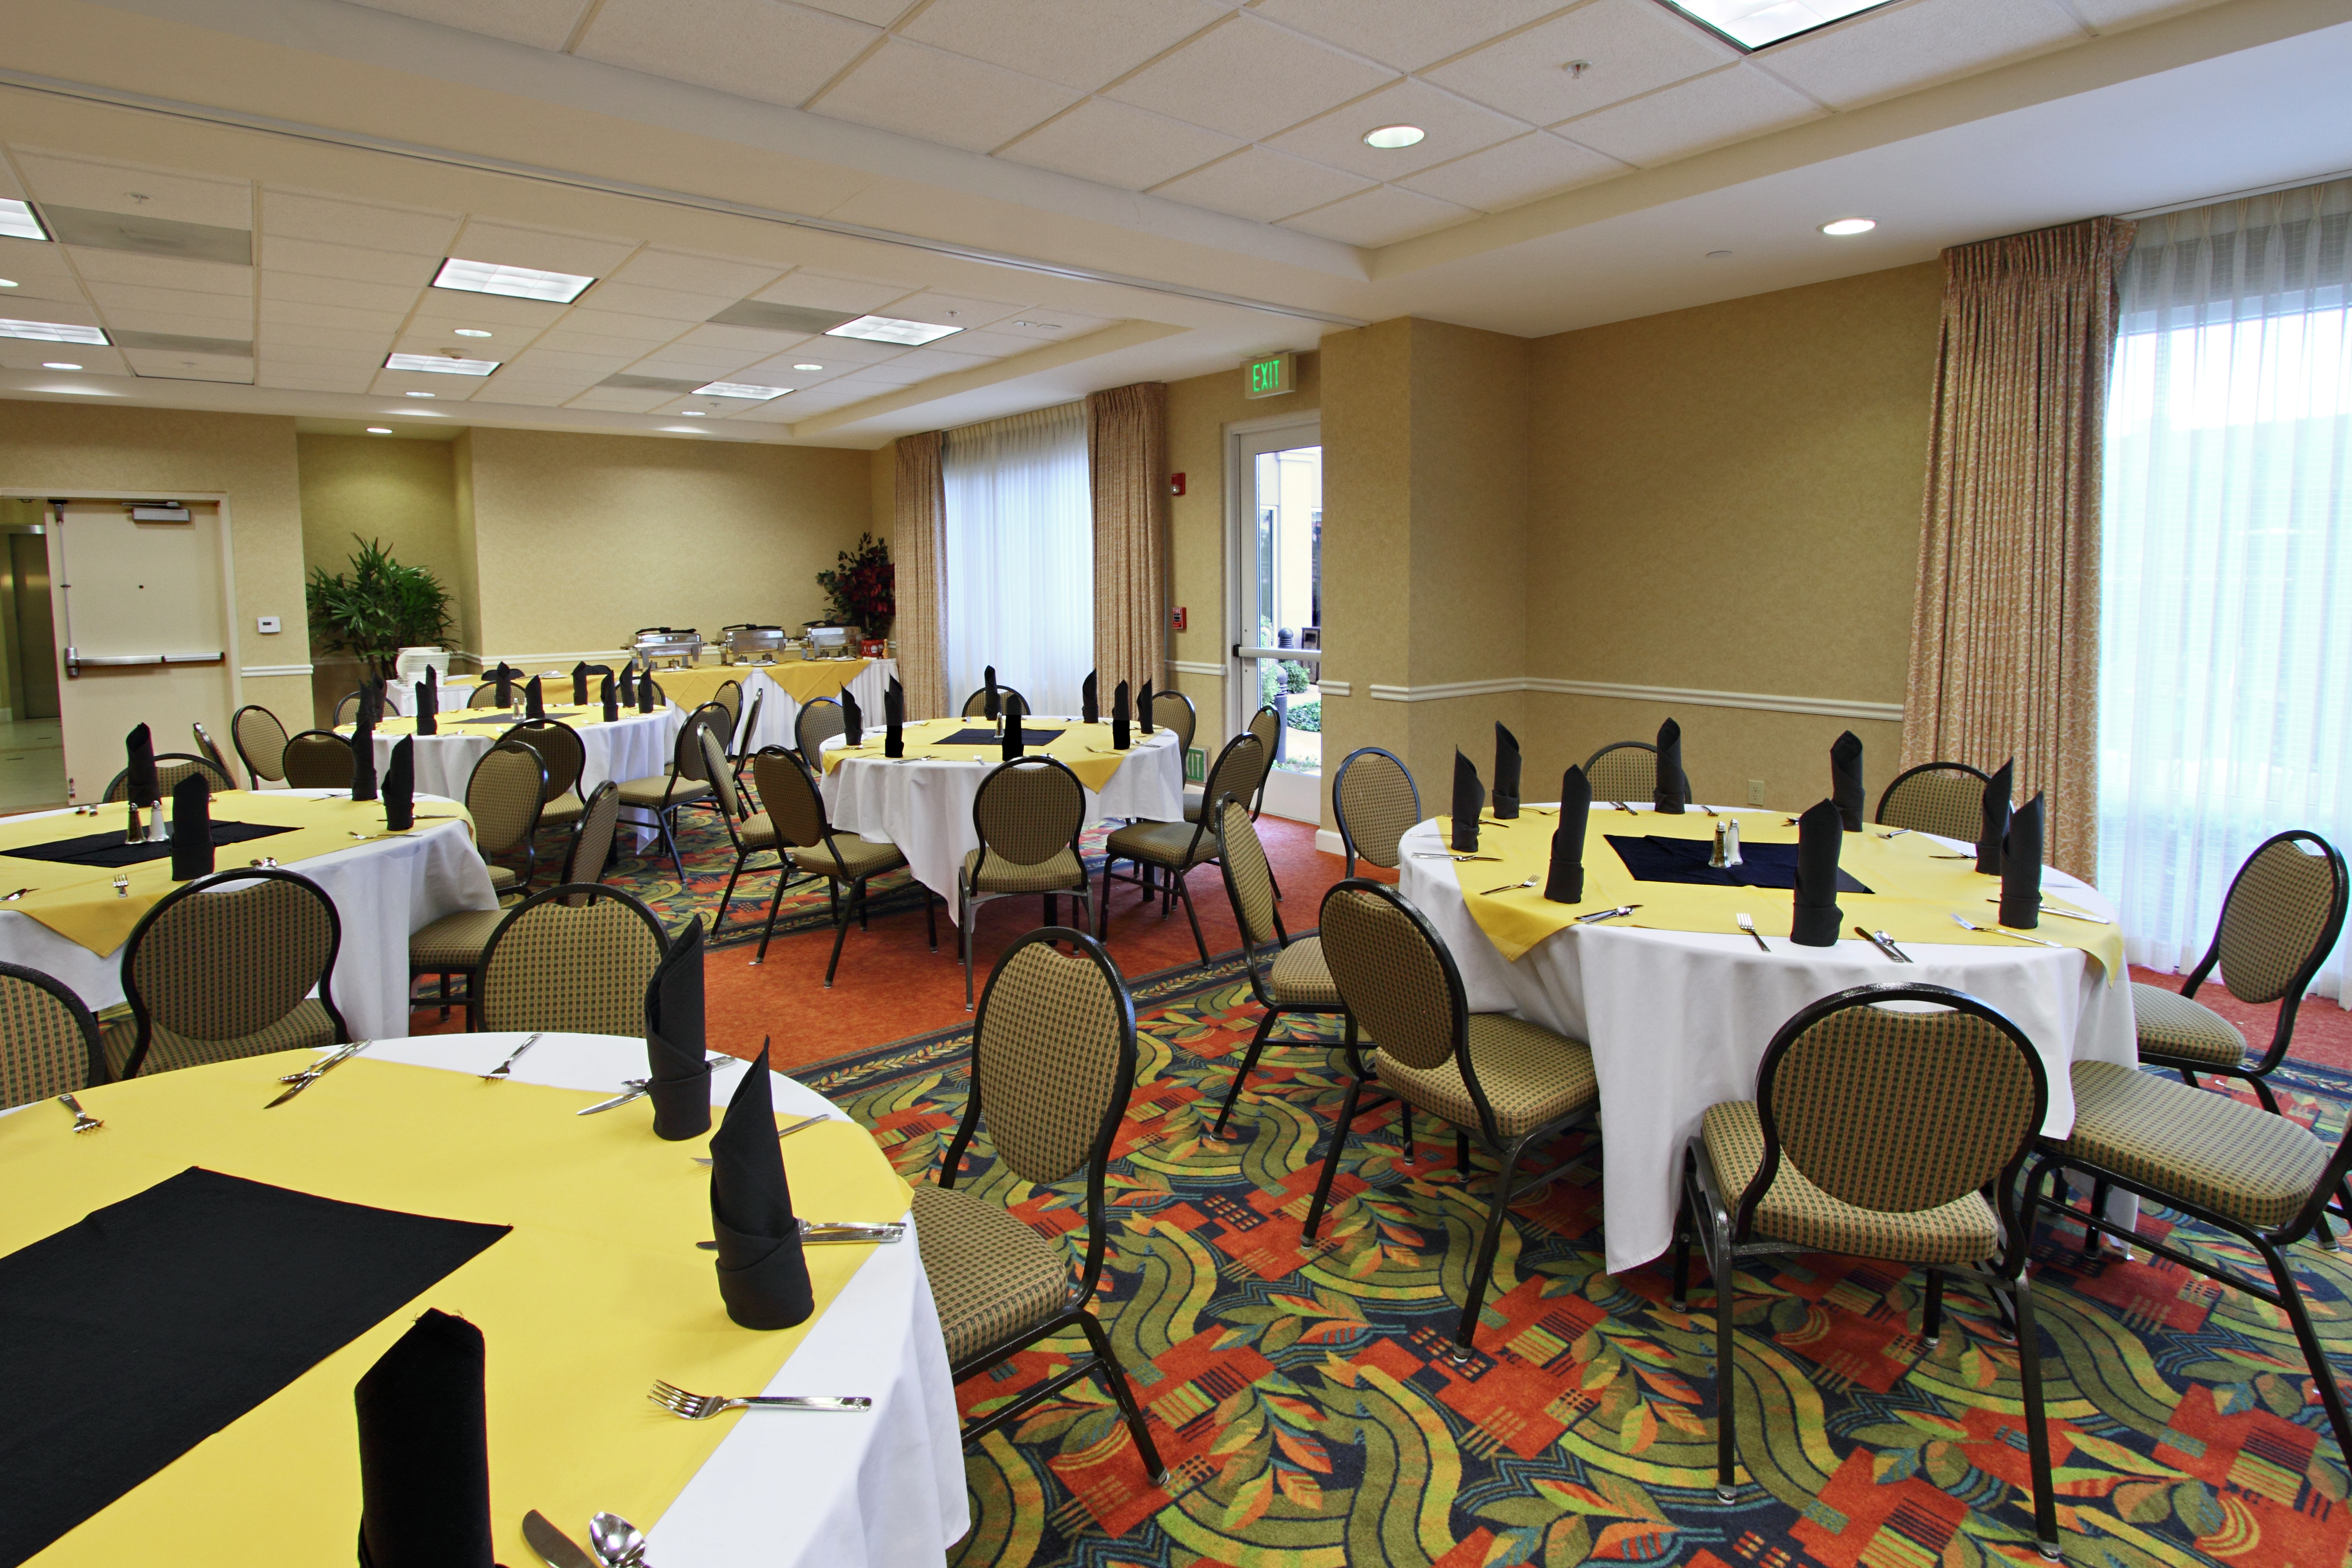 Silverware, Black Napkins, and Linens on Round Tables, Chairs, Food Service Area, Entry Doors and Windows With Long Drapes in Meeting Space Set up for Banquet